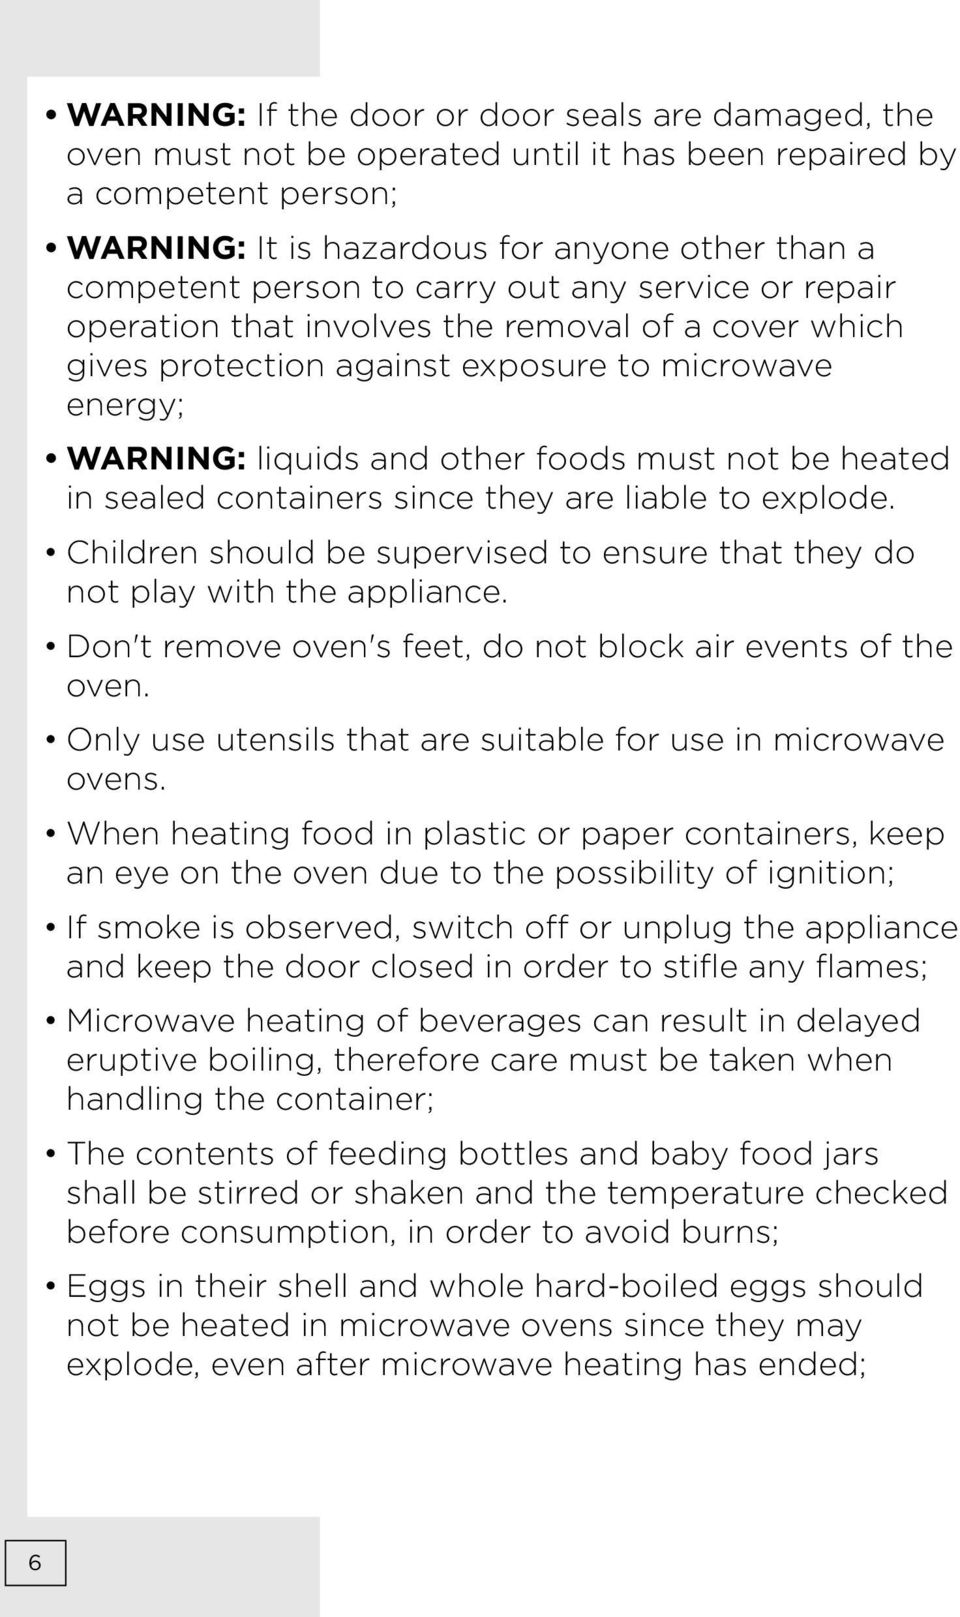 sealed containers since they are liable to explode. Children should be supervised to ensure that they do not play with the appliance. Don't remove oven's feet, do not block air events of the oven.